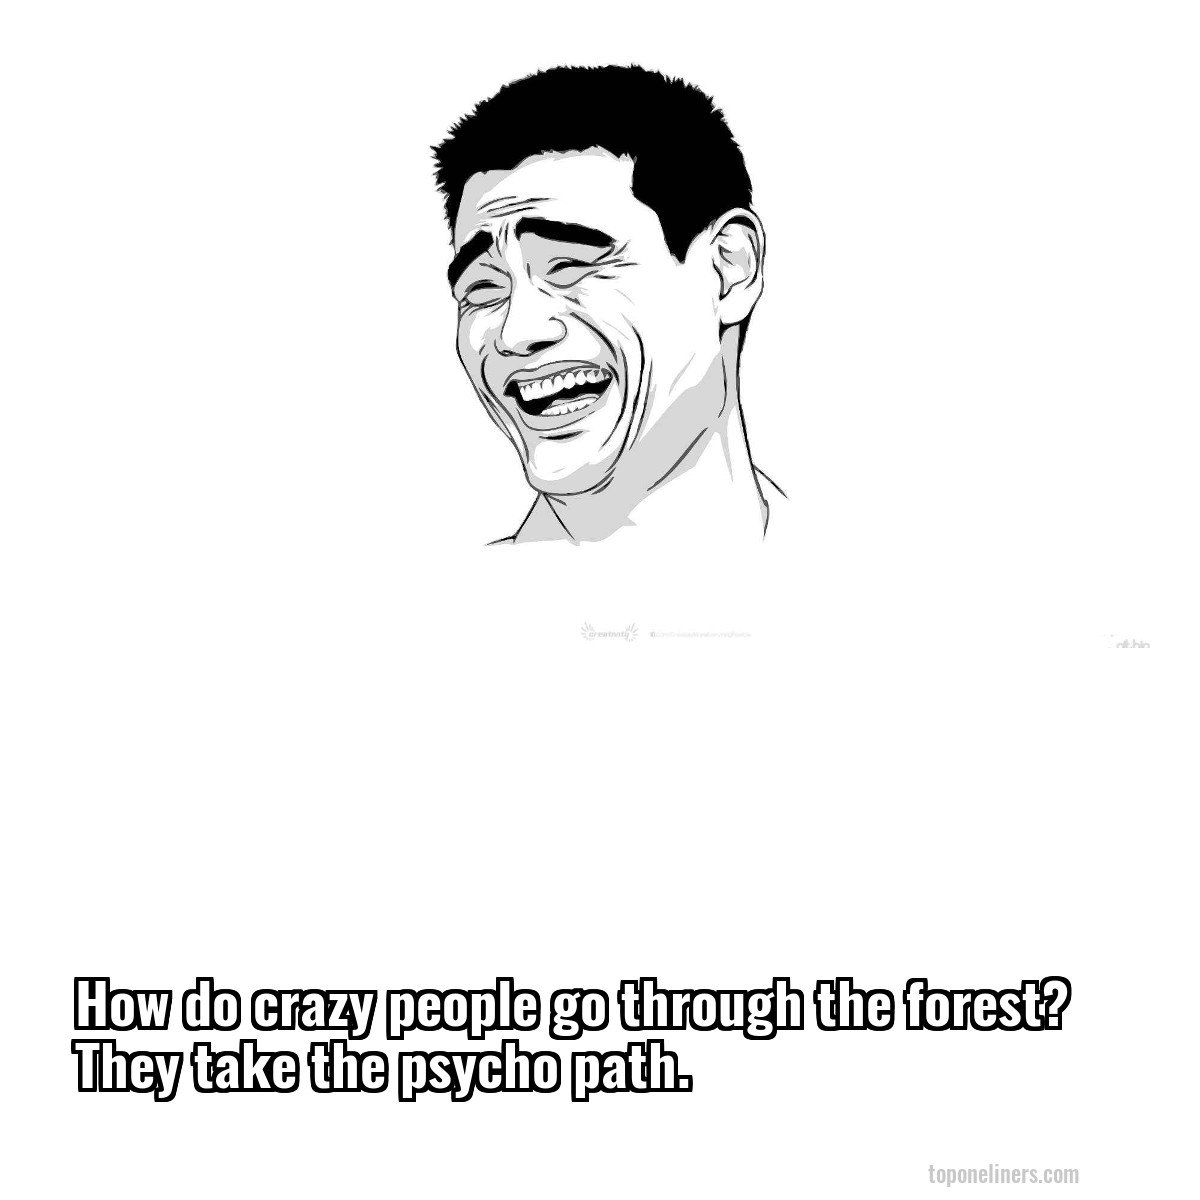 How do crazy people go through the forest? They take the psycho path.
